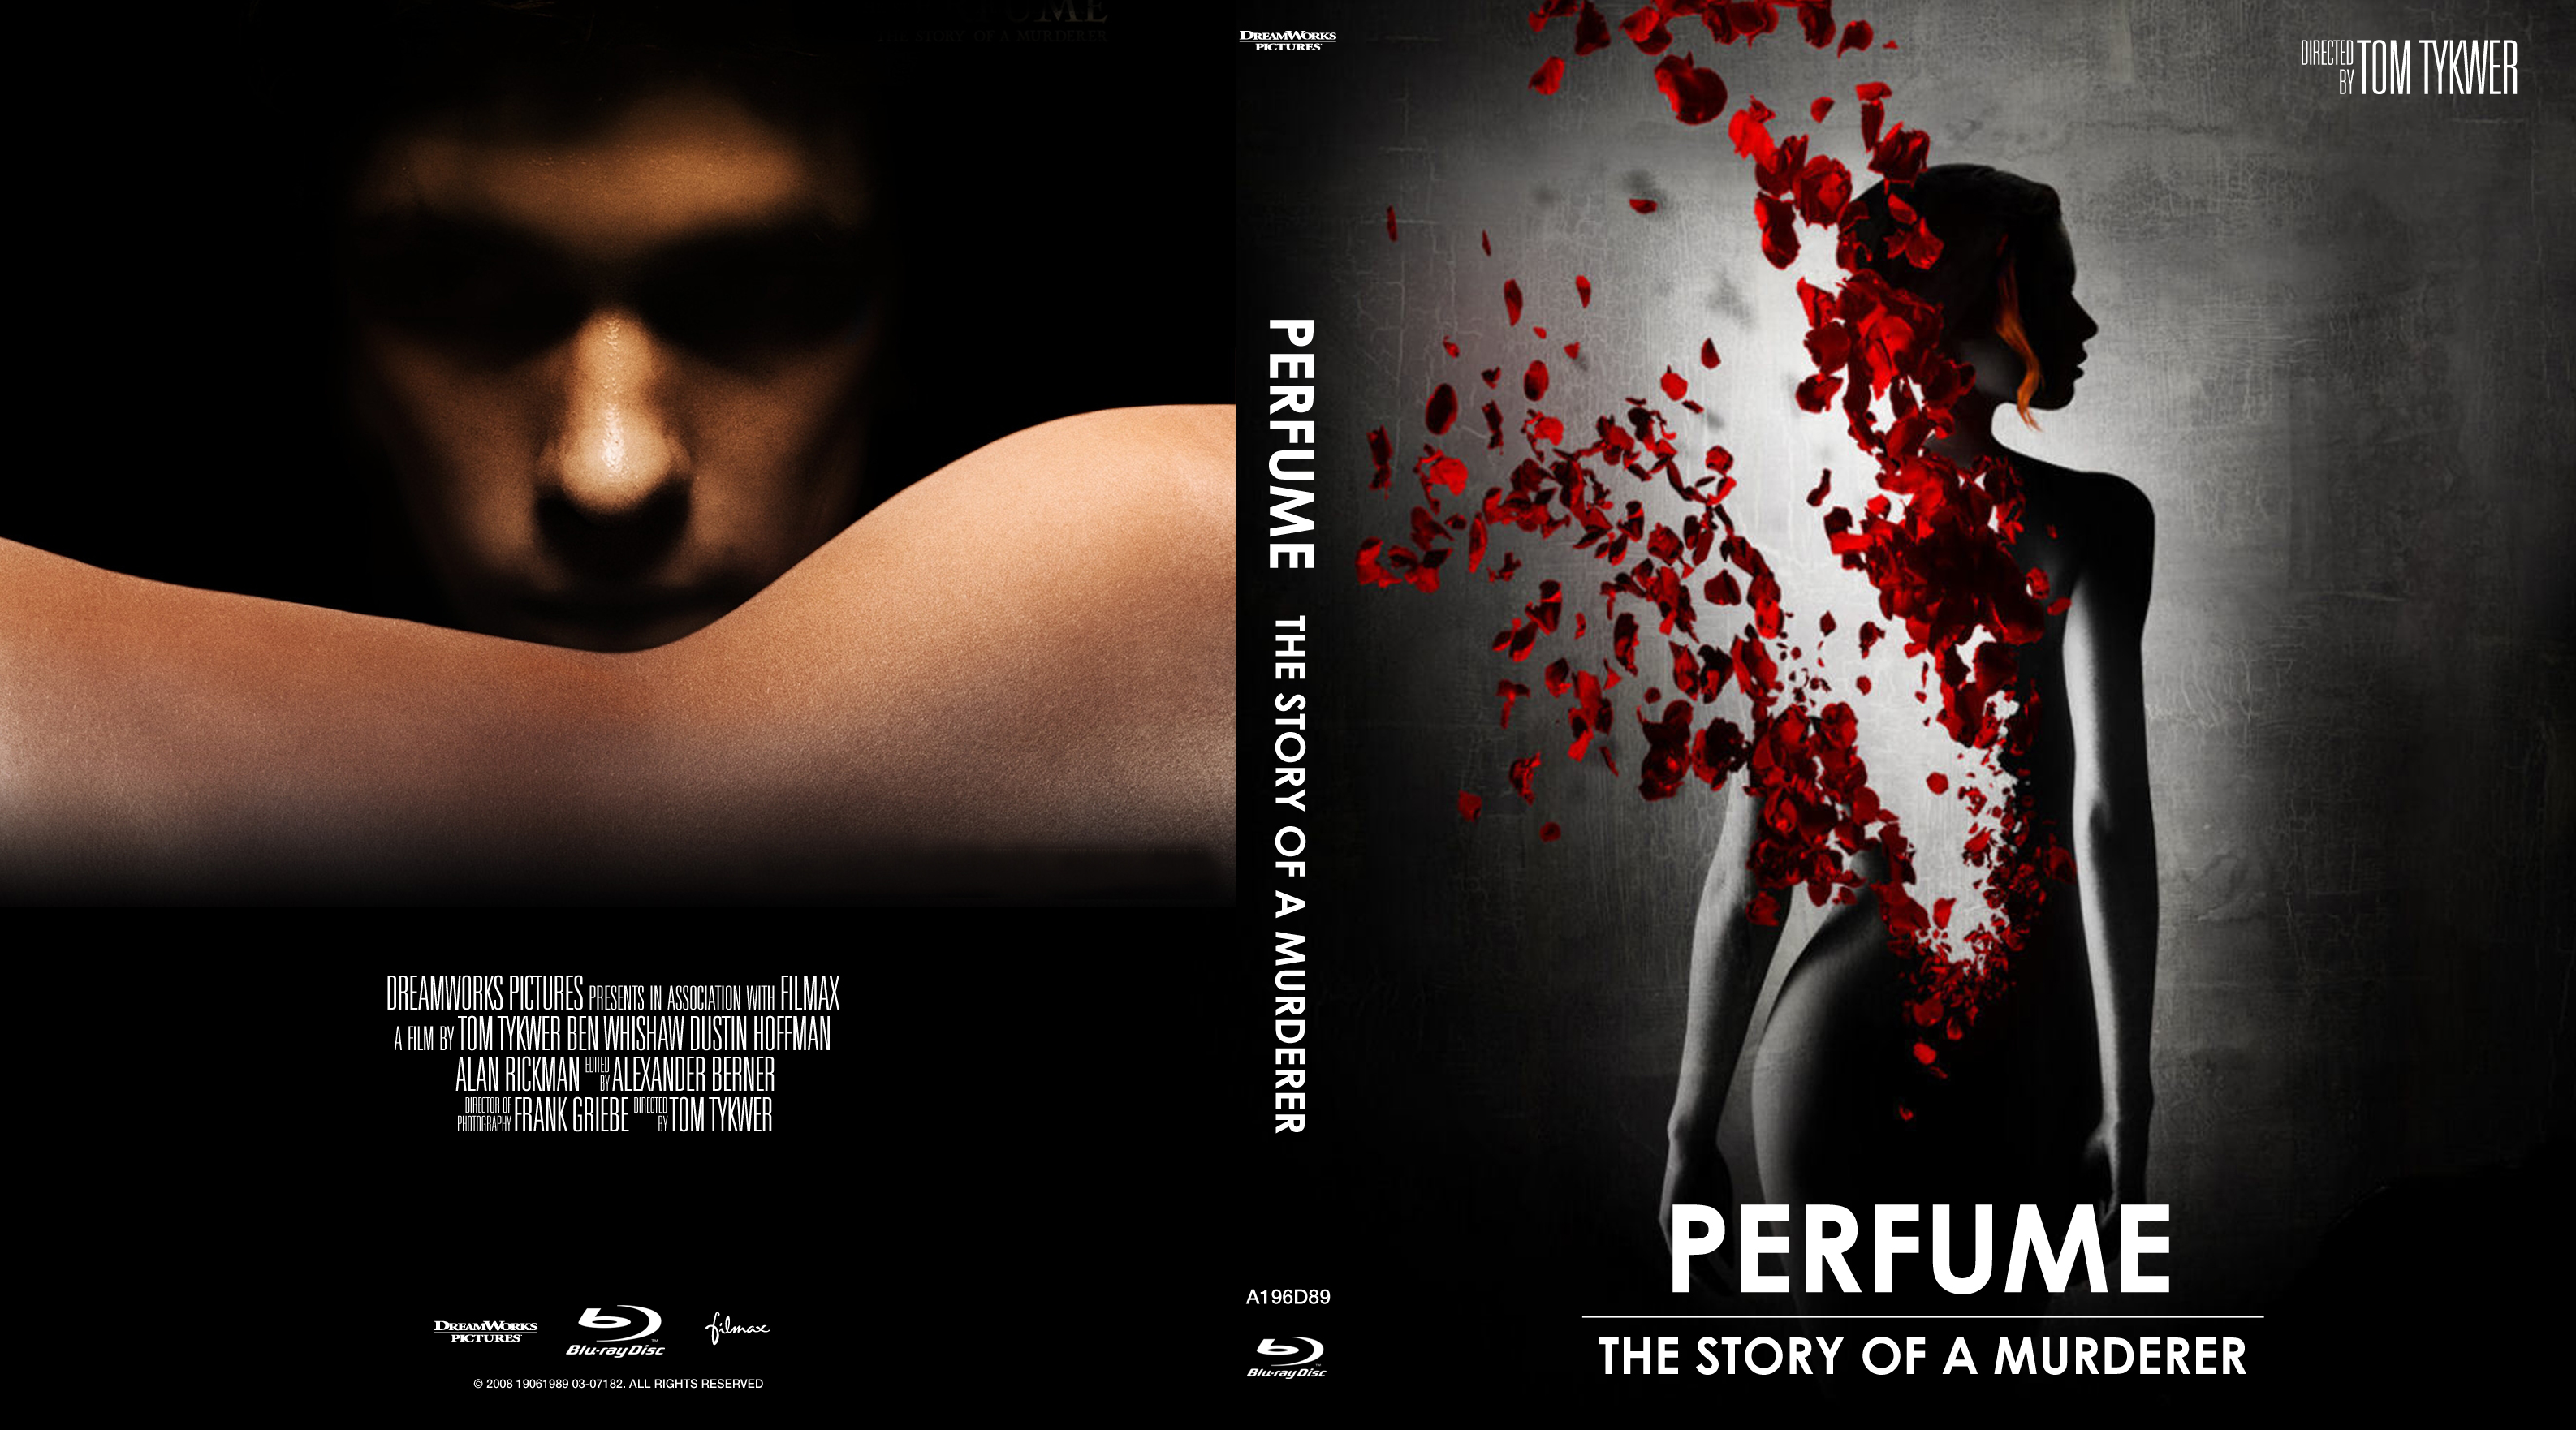 Perfume: The Story Of A Murderer Backgrounds, Compatible - PC, Mobile, Gadgets| 3173x1762 px